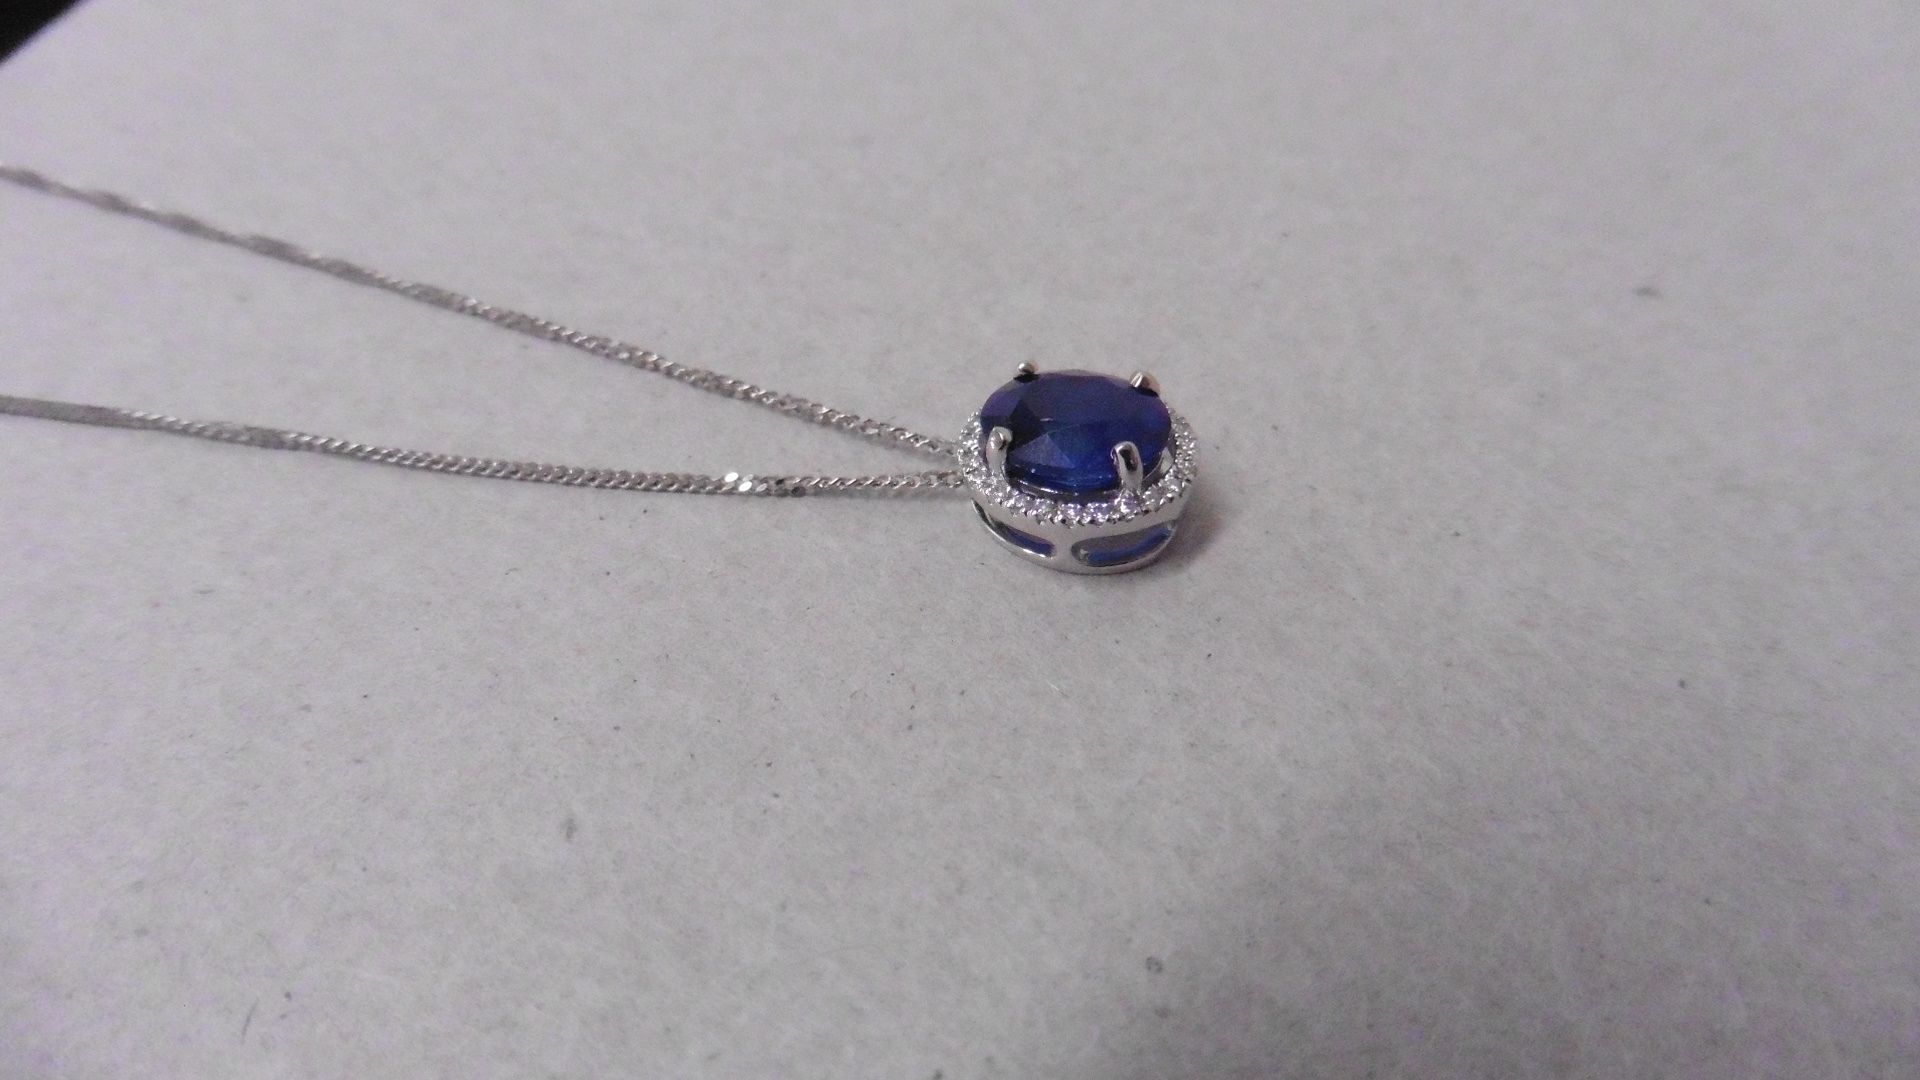 0.80ct halo set diamond pendant. Oval cut sapphire ( glass filled ) in the centre, 0.80ct, with a - Image 3 of 3